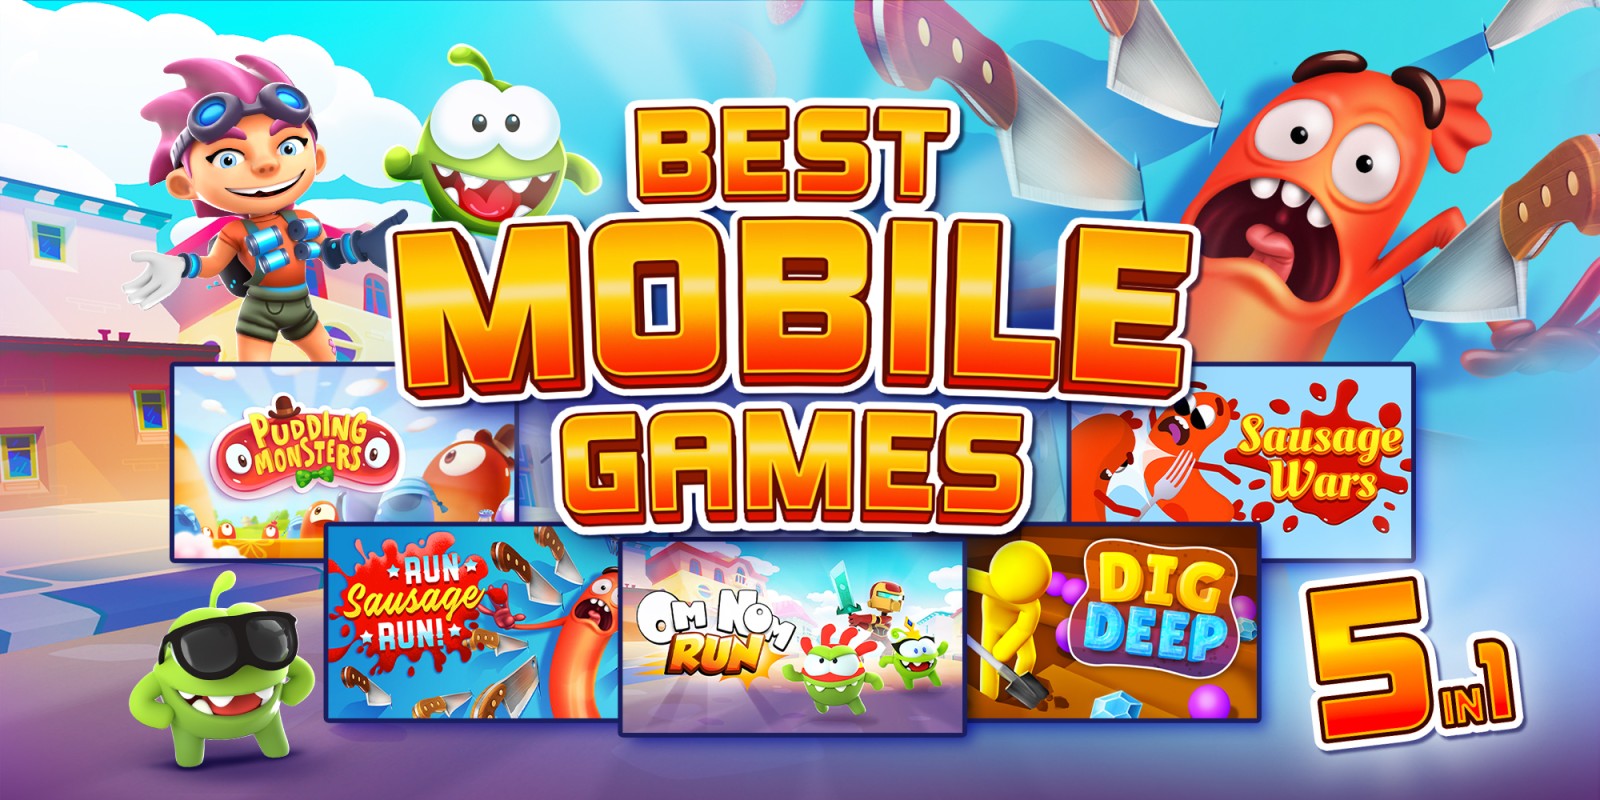 Best Mobile Games 5in1 Nintendo Switch download software Games